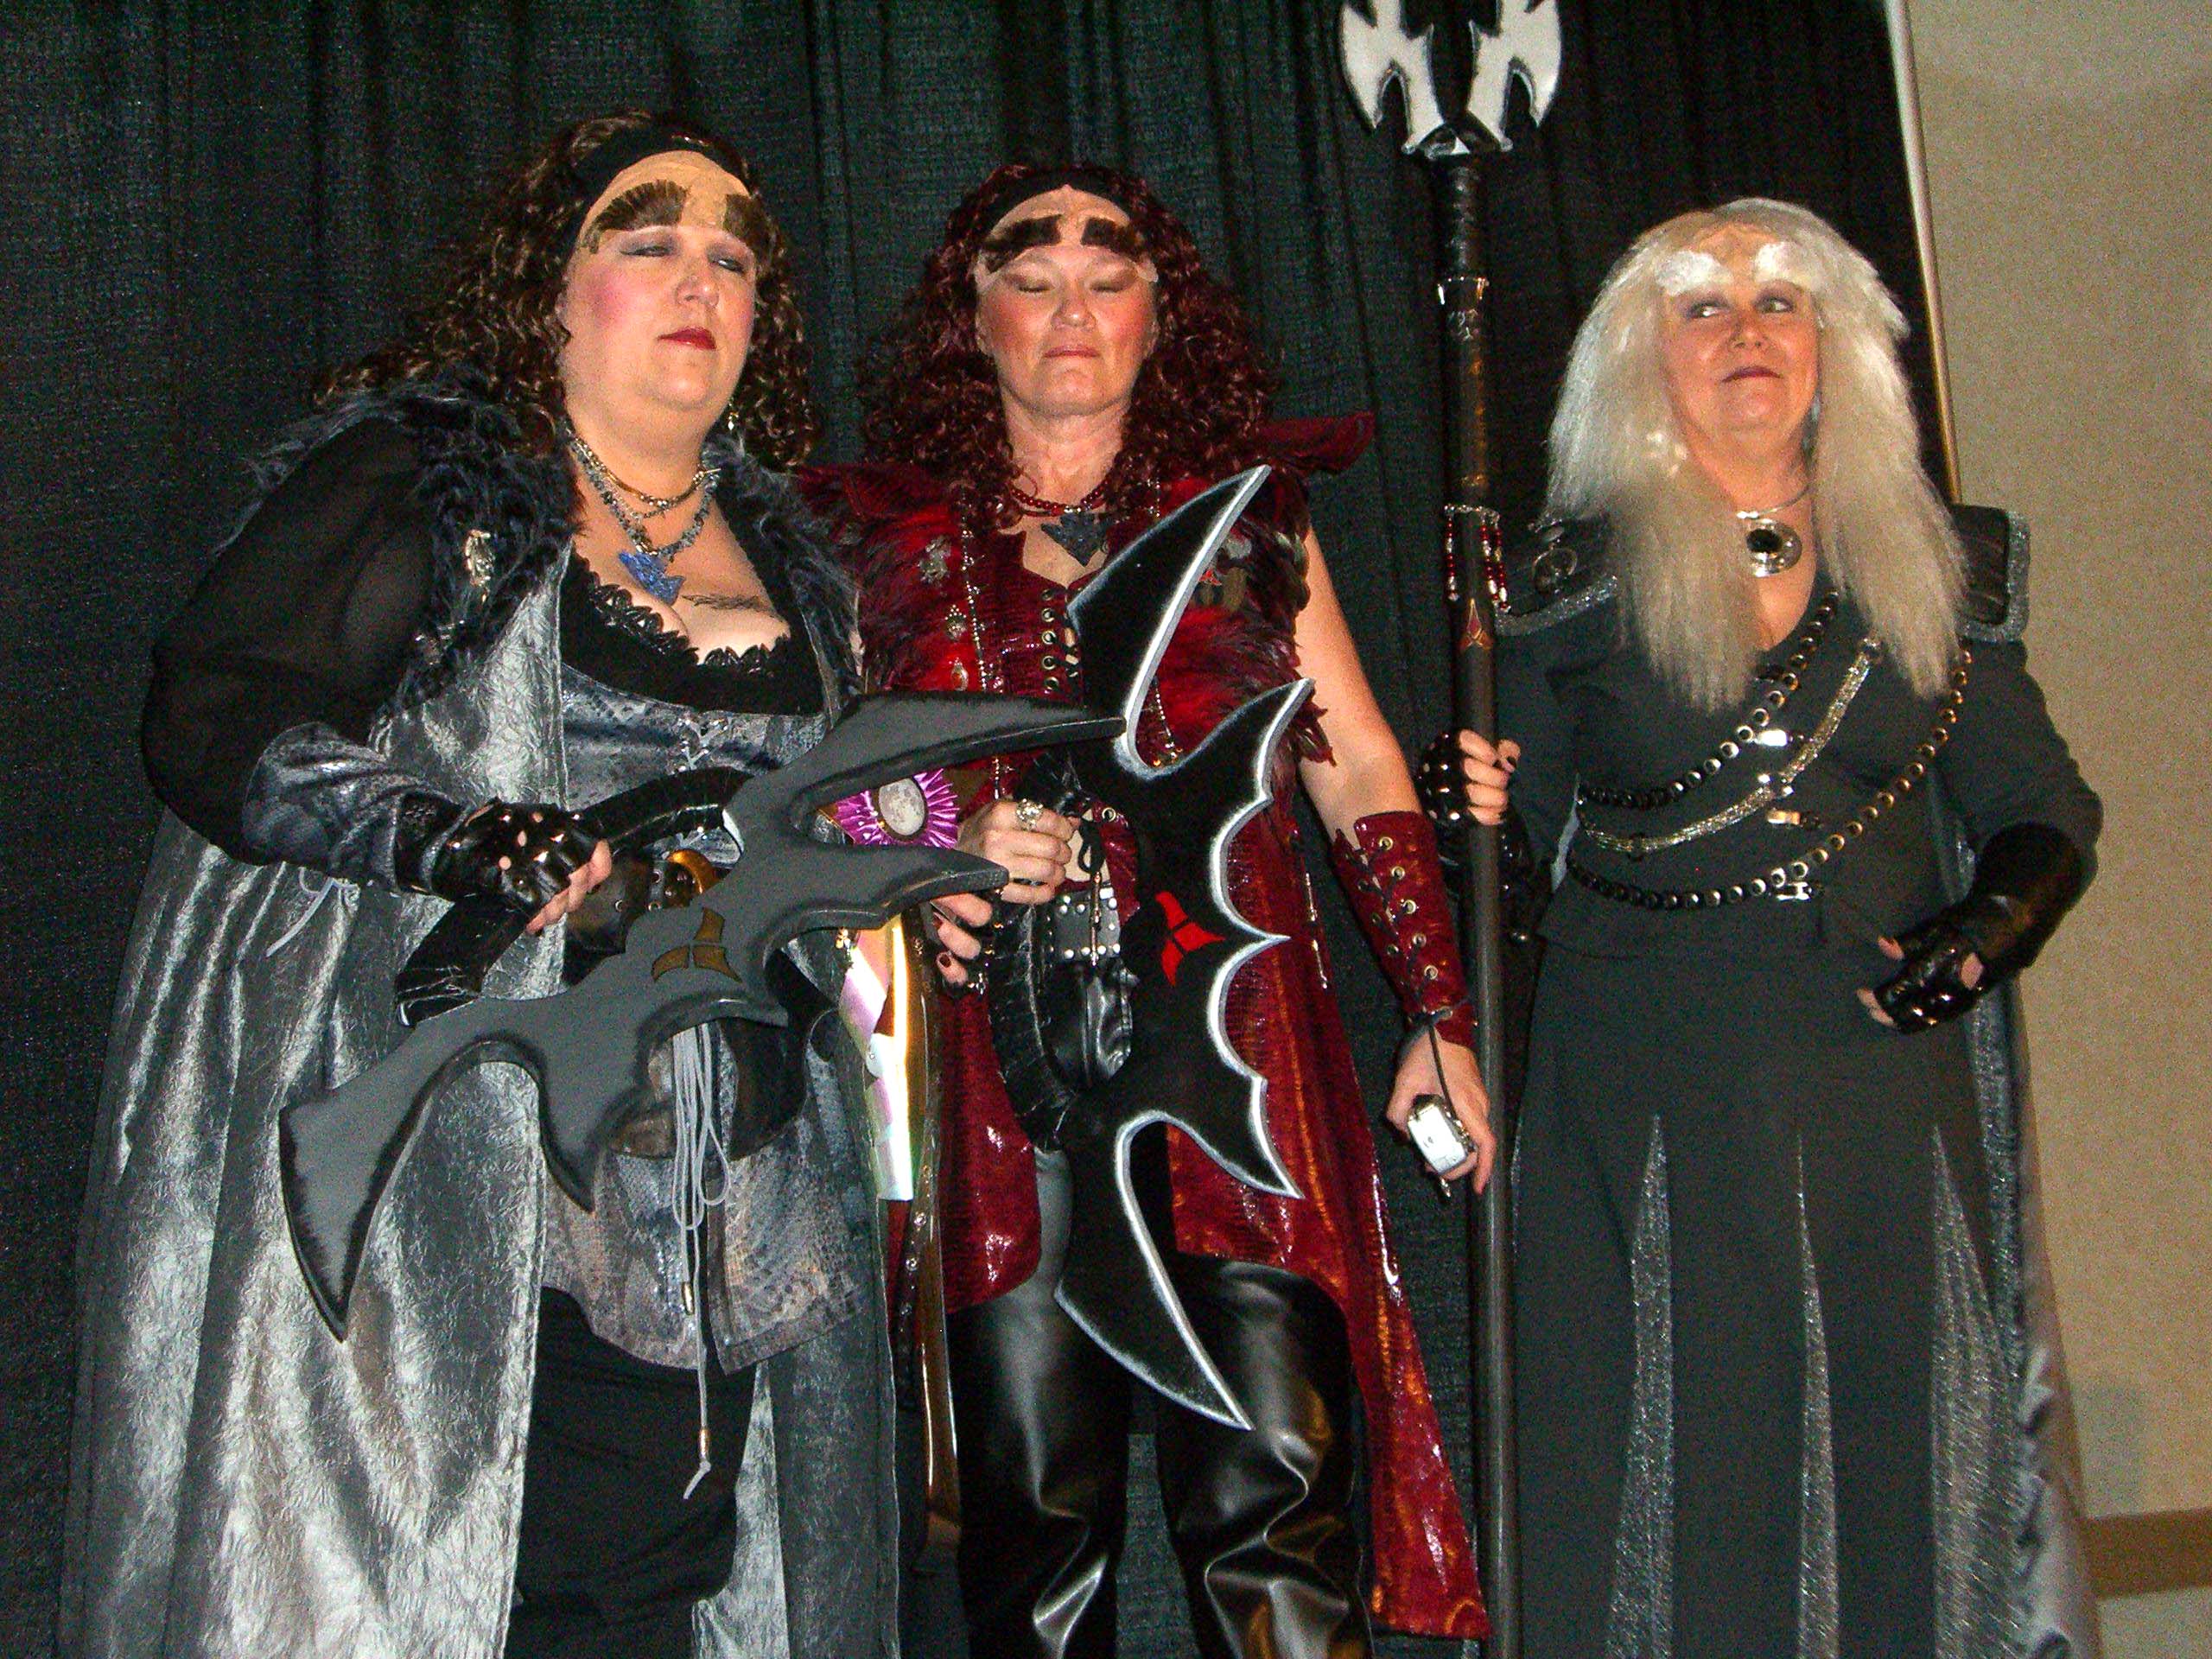 The Klingon group costume took the second place in the masquarade contest